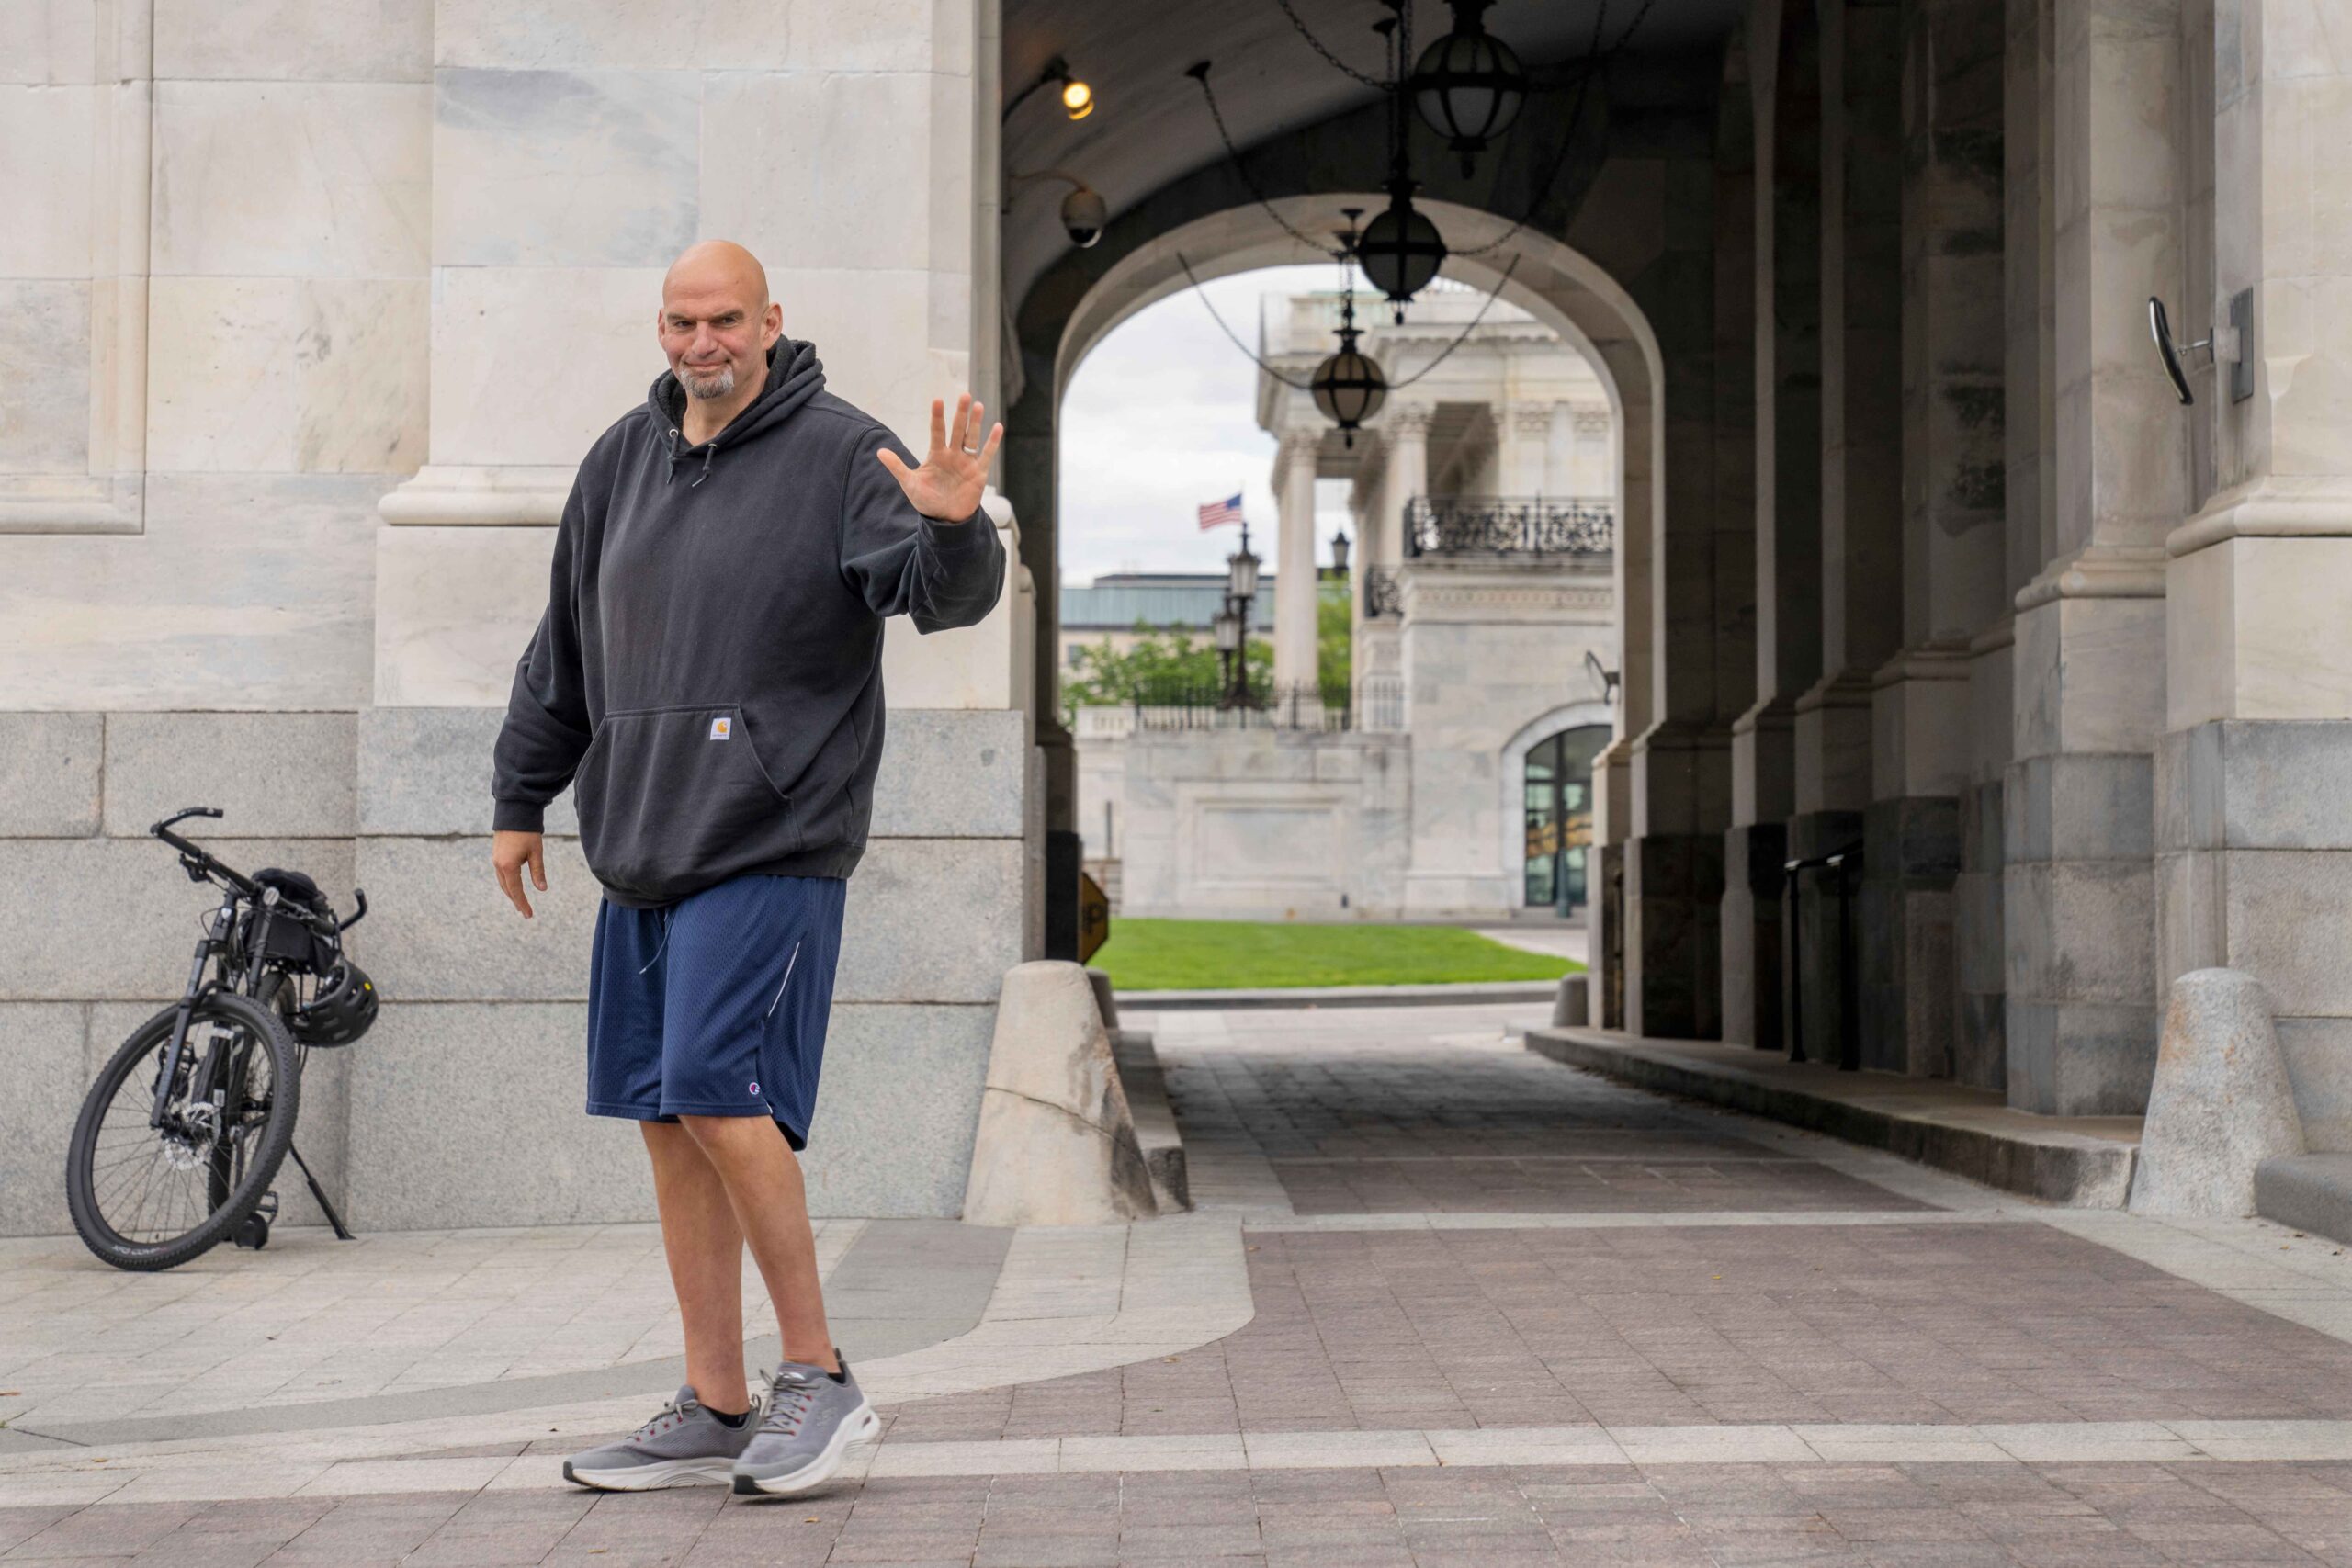 The U.S. Senate is officially dropping its dress code, allowing its members to wear whatever they would like for the benefit of John Fetterman (D-PA).